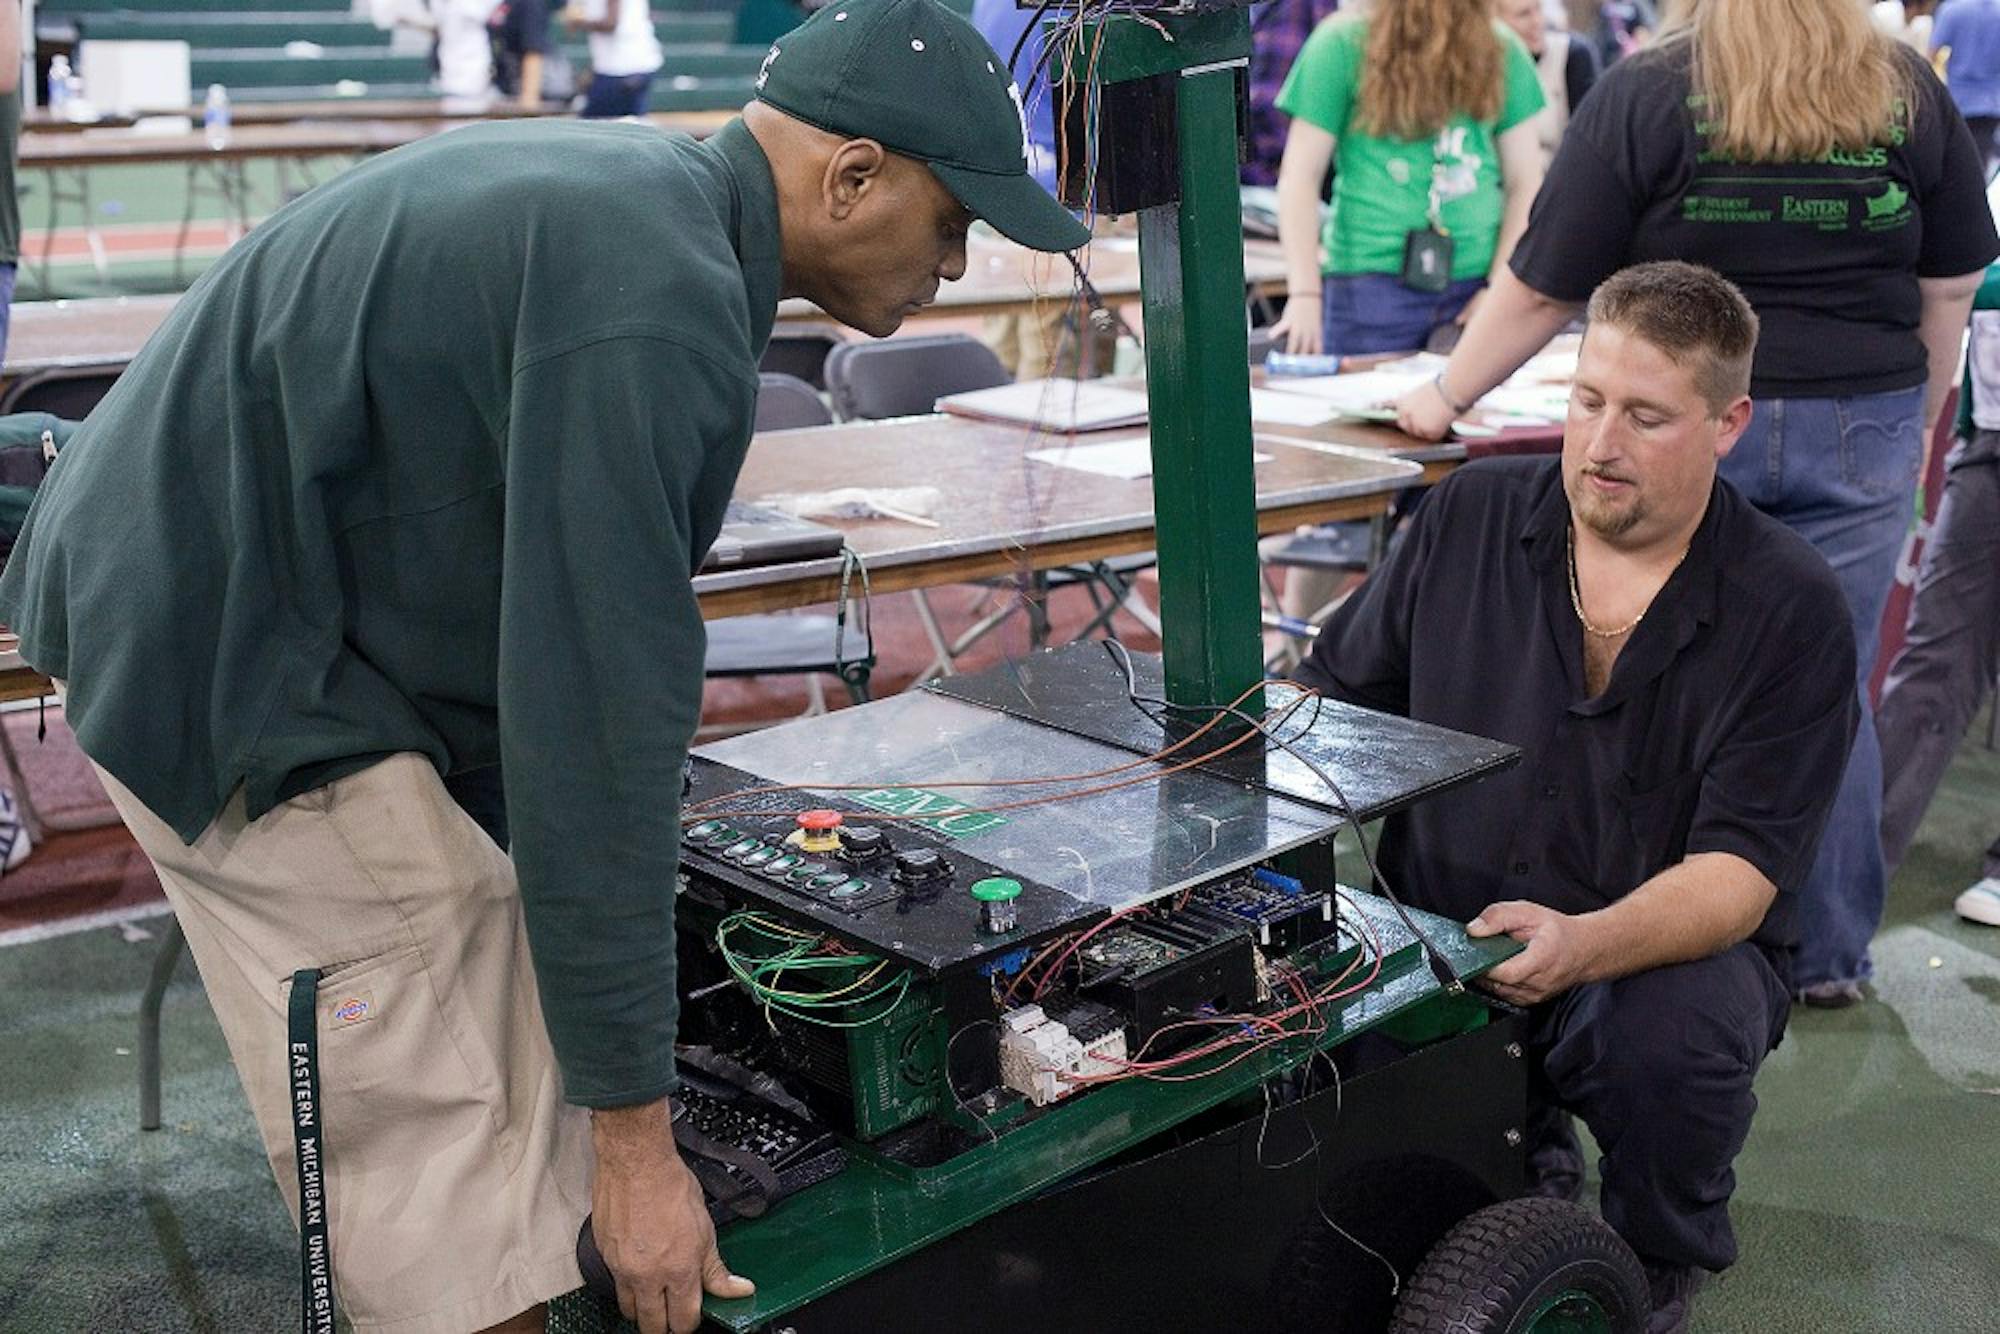 Nathan Jones (left), president of the Robotics Society at EMU, lifts the electronics and top of the new robot with some help from member Corey Horvath.  The robot was present at this year's Fajita Fest in Bowen Field House.